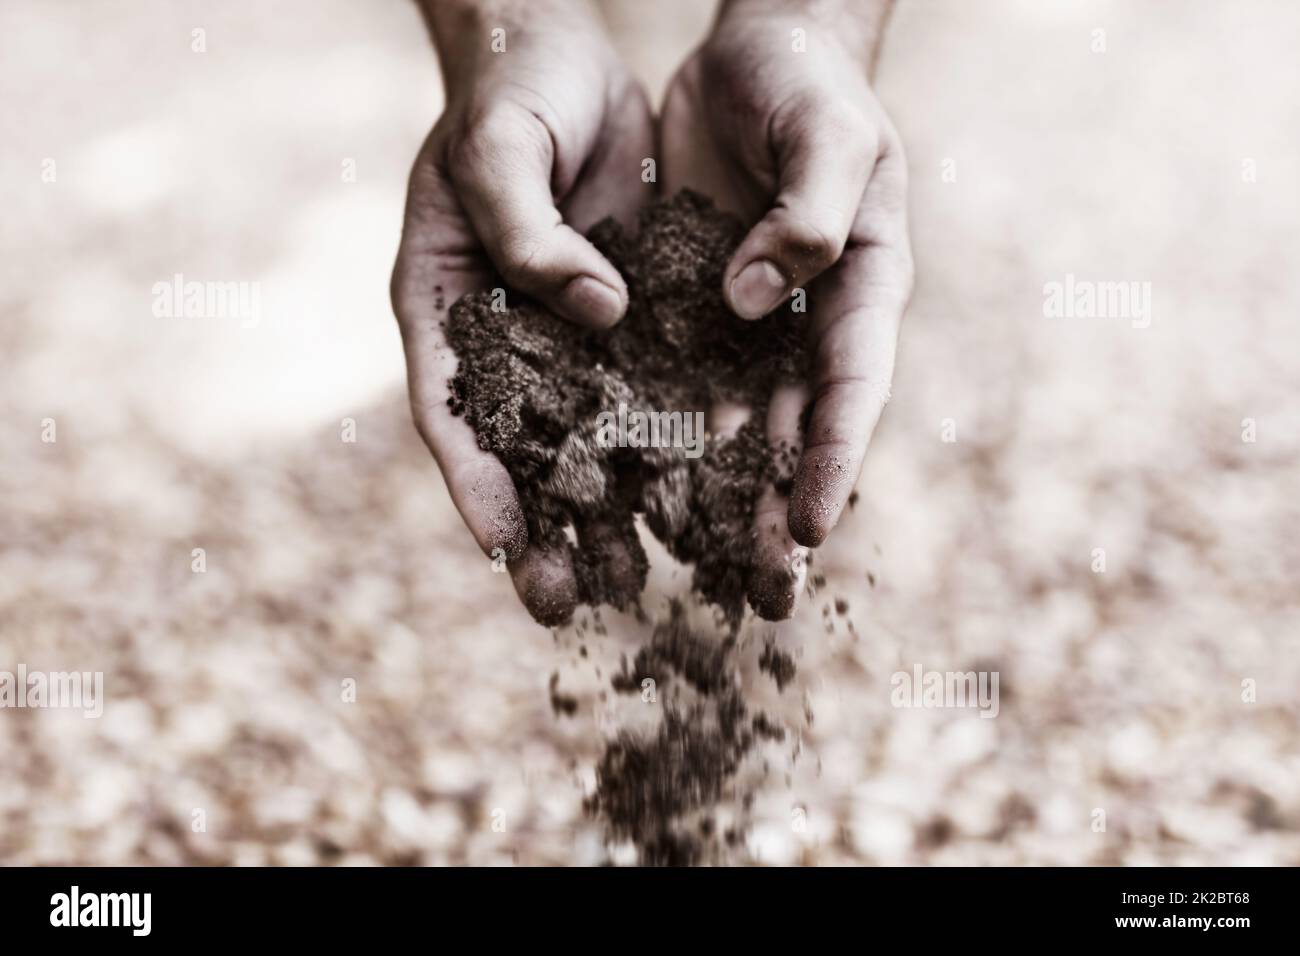 Returning the earth. Two hands holding dirt. Stock Photo